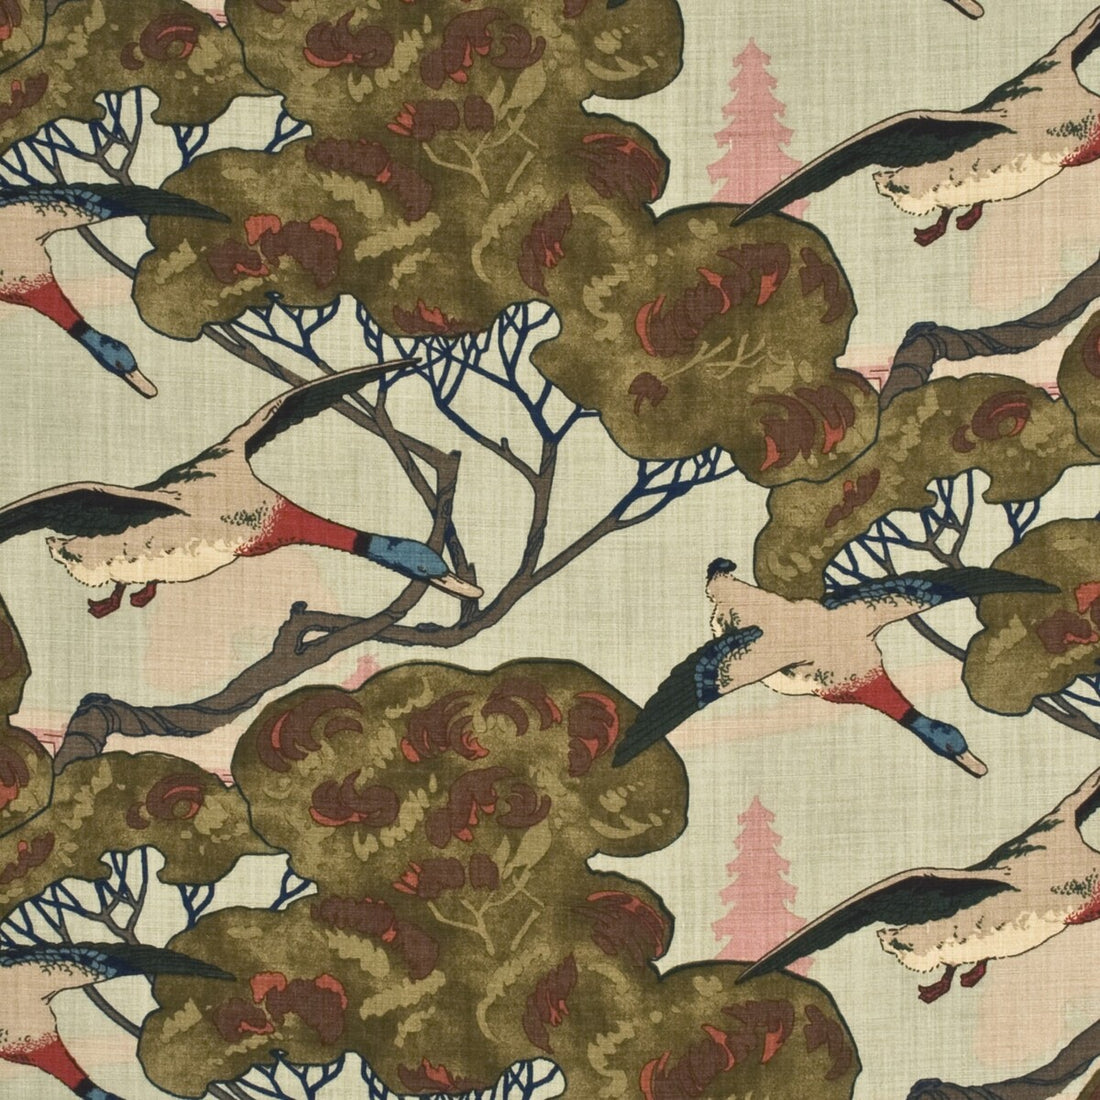 Flying Ducks fabric in sky color - pattern FD205.H22.0 - by Mulberry in the Mulberry Best Of collection